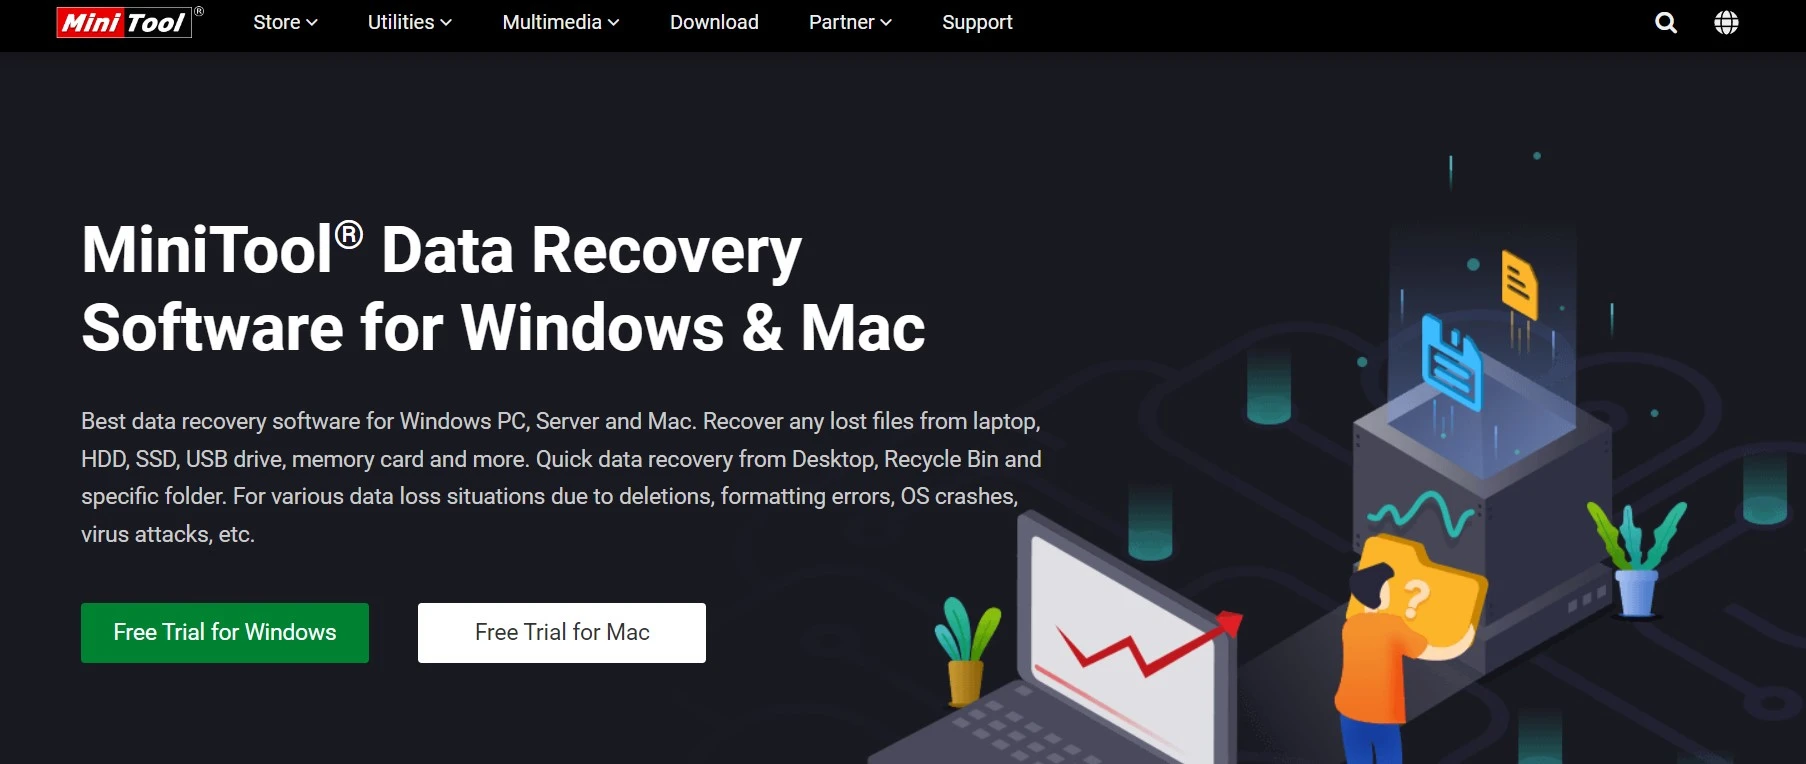 Minitool mobile recovery tool for recovering whatsapp chat